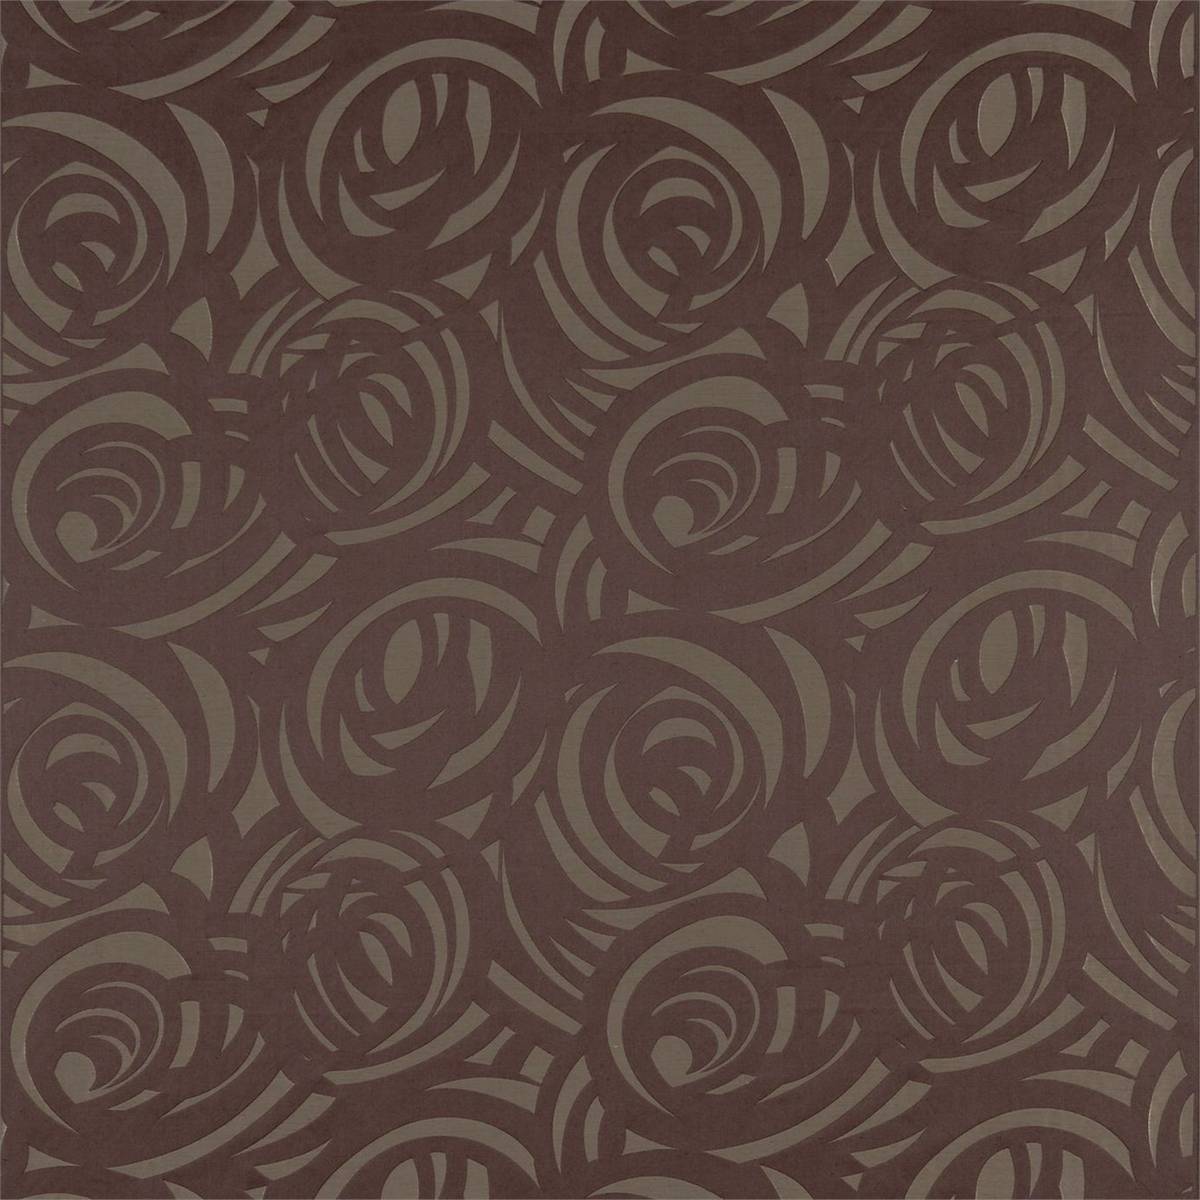 Vortex Chocolate and Neutral Fabric by Harlequin